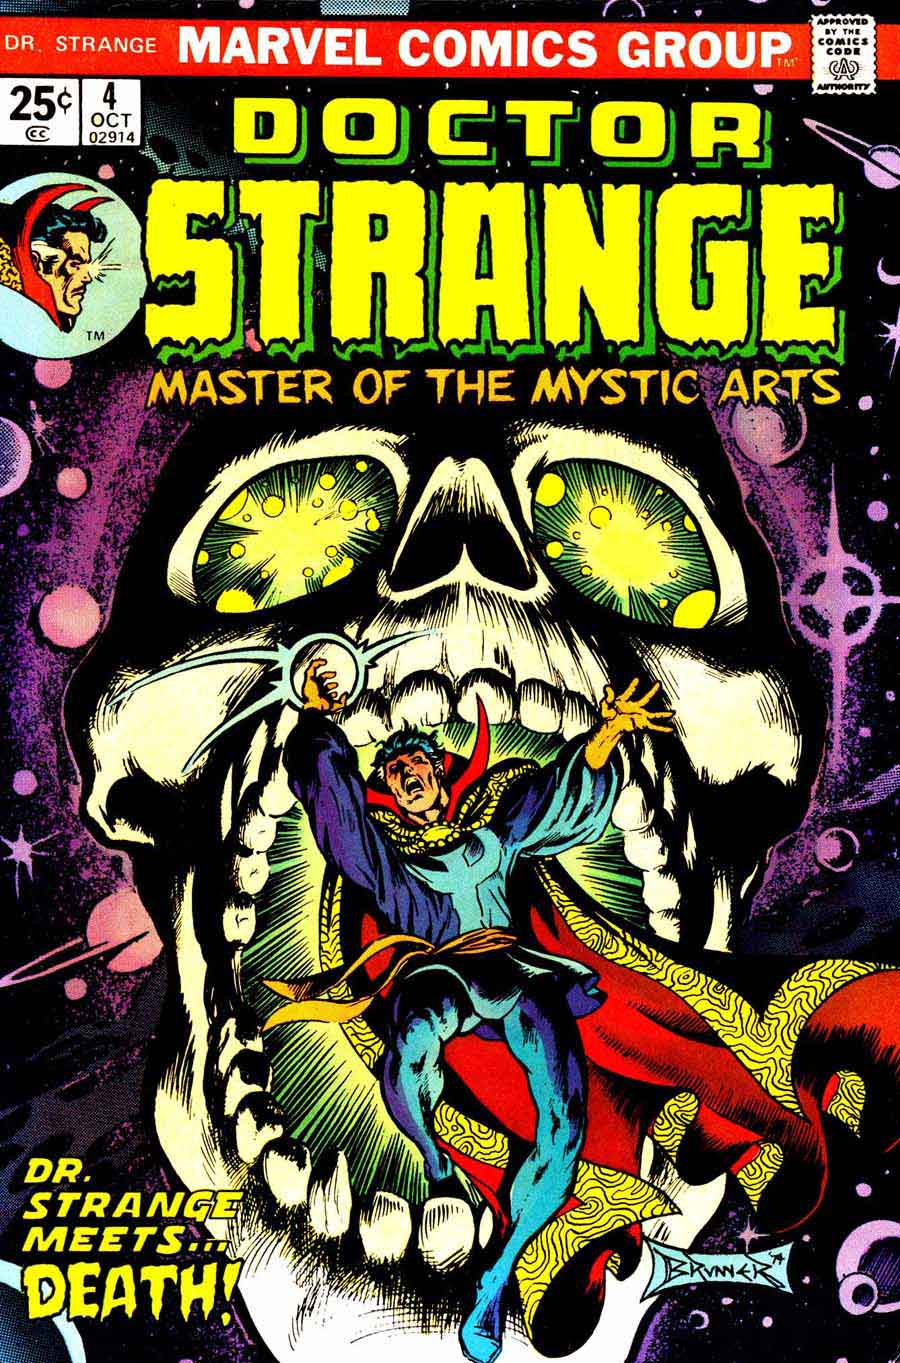 1000 Images About Dr Strange On Pinterest Doctor Strange Steve Ditko And  Comic Covers | Free Hot Nude Porn Pic Gallery